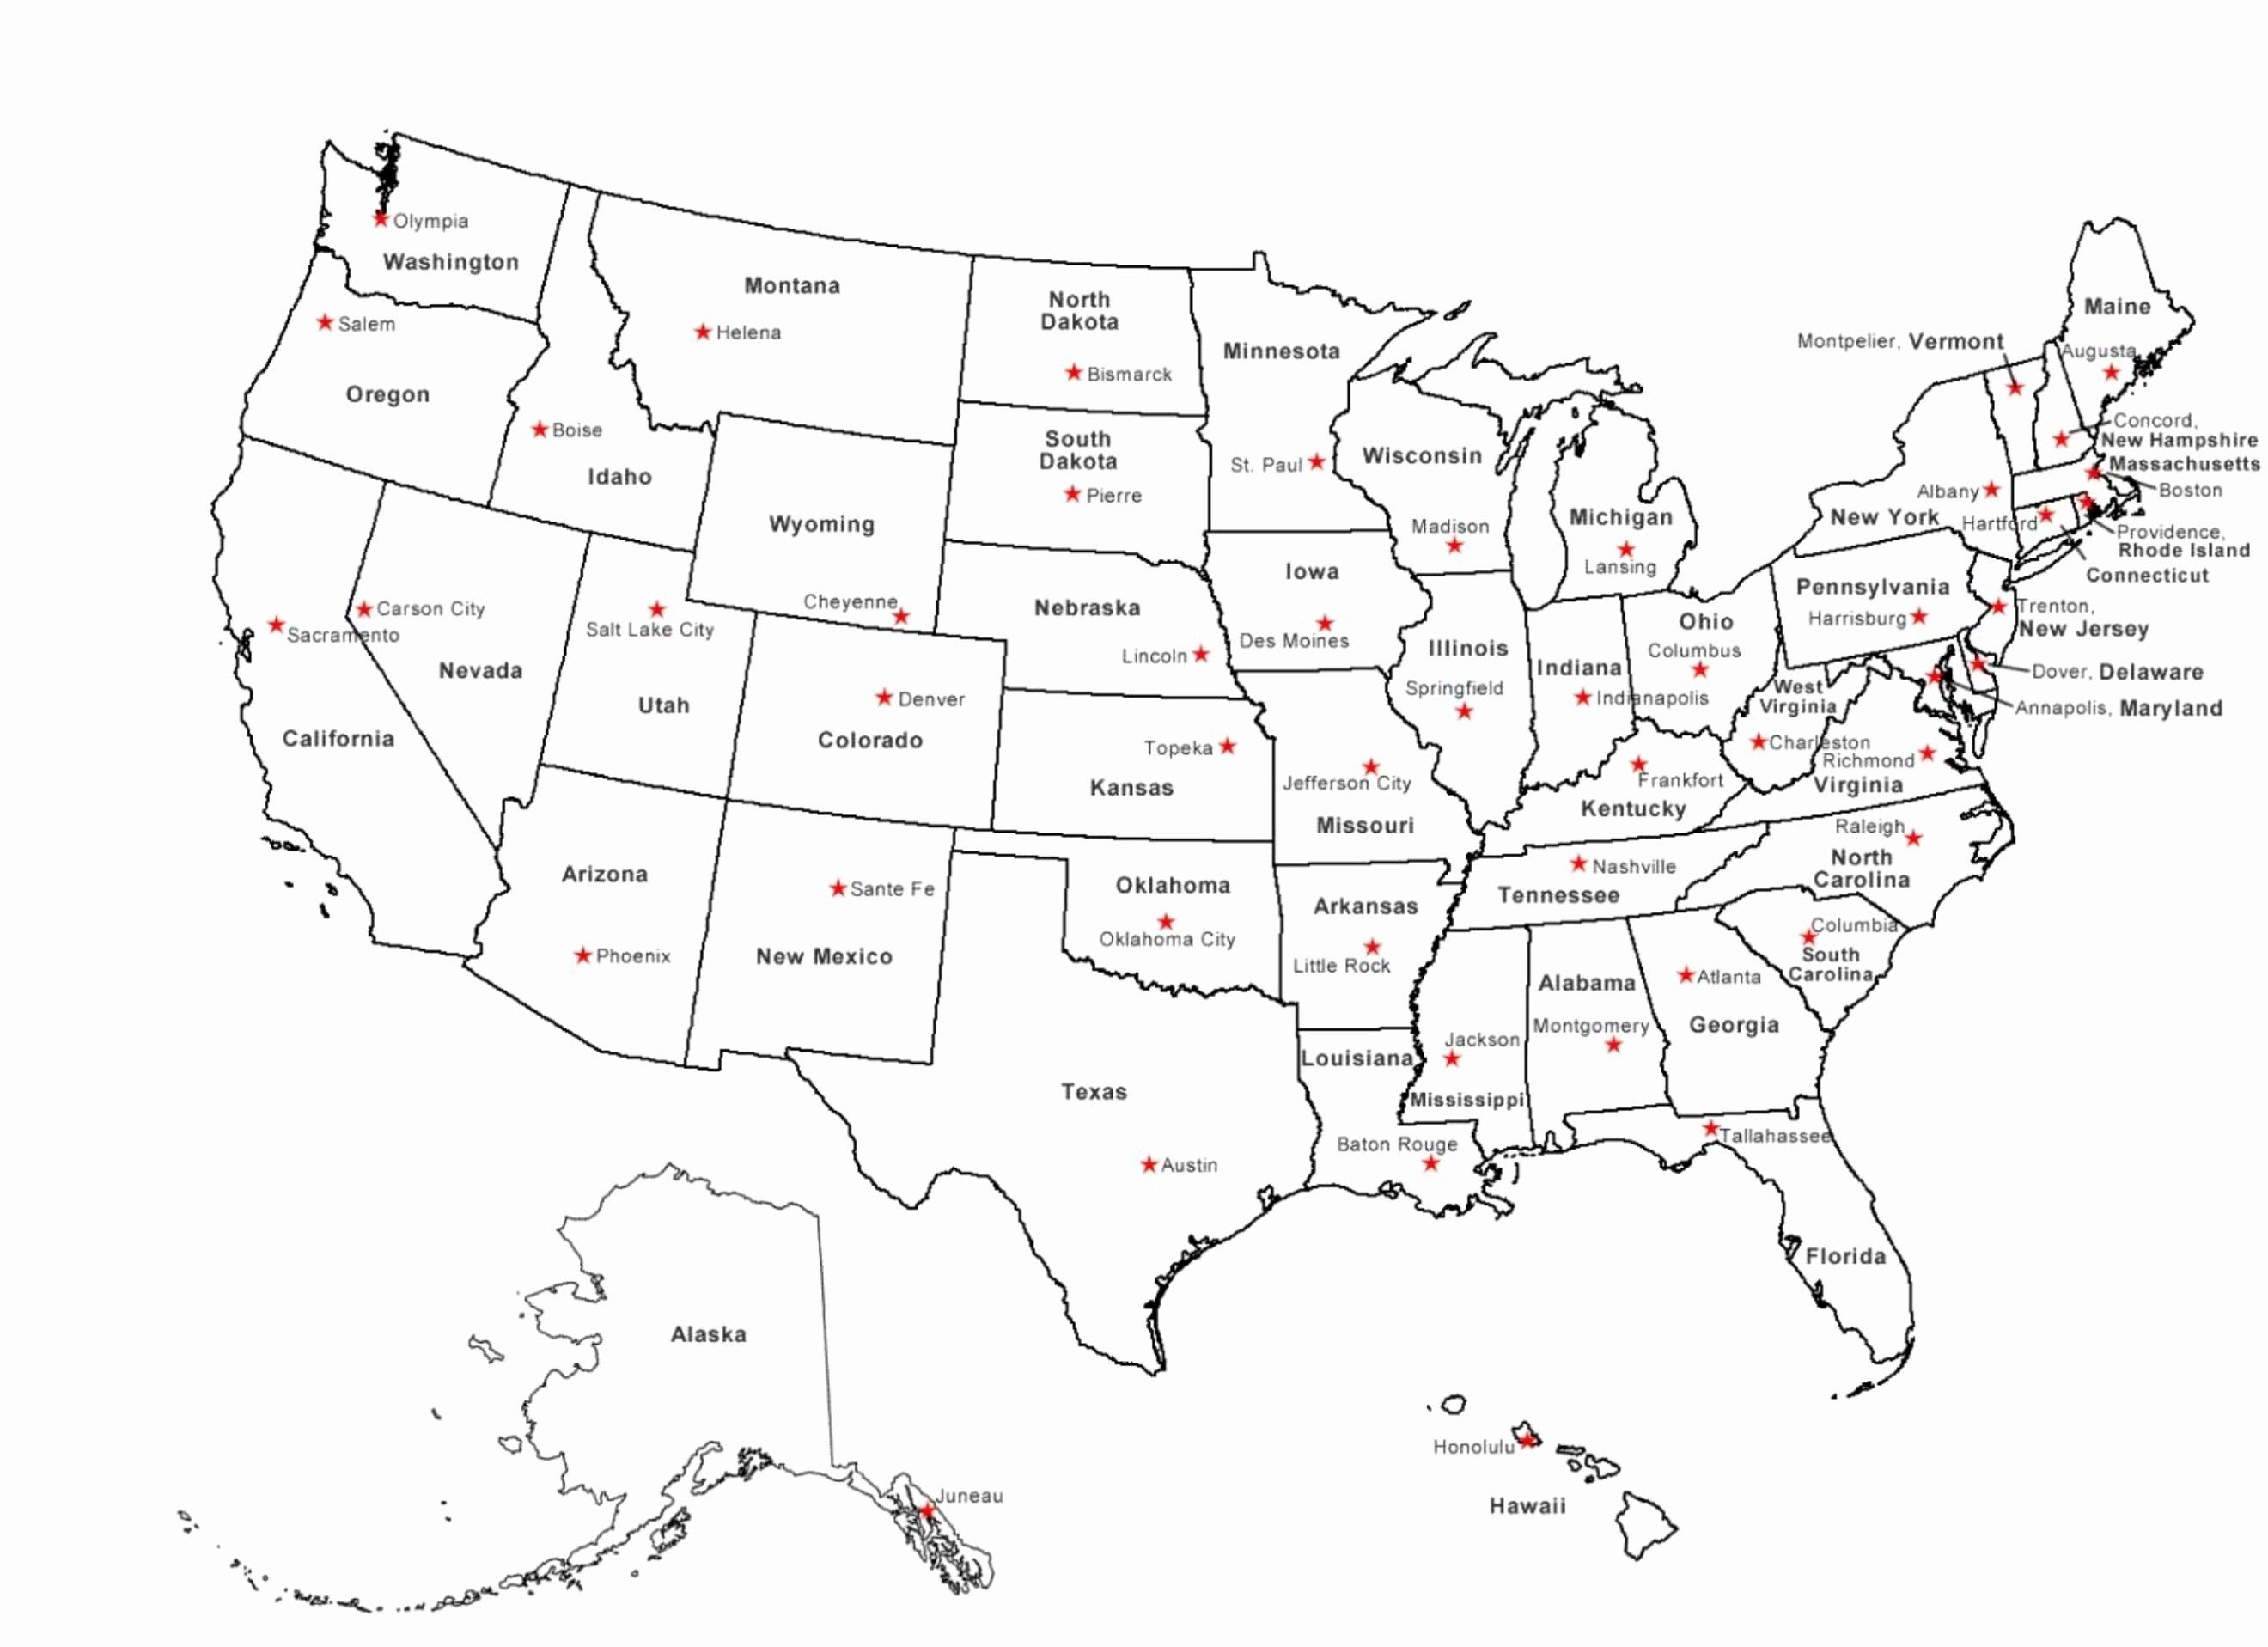 2640x1917 Us Map States Abbreviations Map Of Usa With State Names Refrence Full Image Wallpapers Map Of &acirc;&#128;&brvbar; | United states map printable, Us map printable, States and capitals